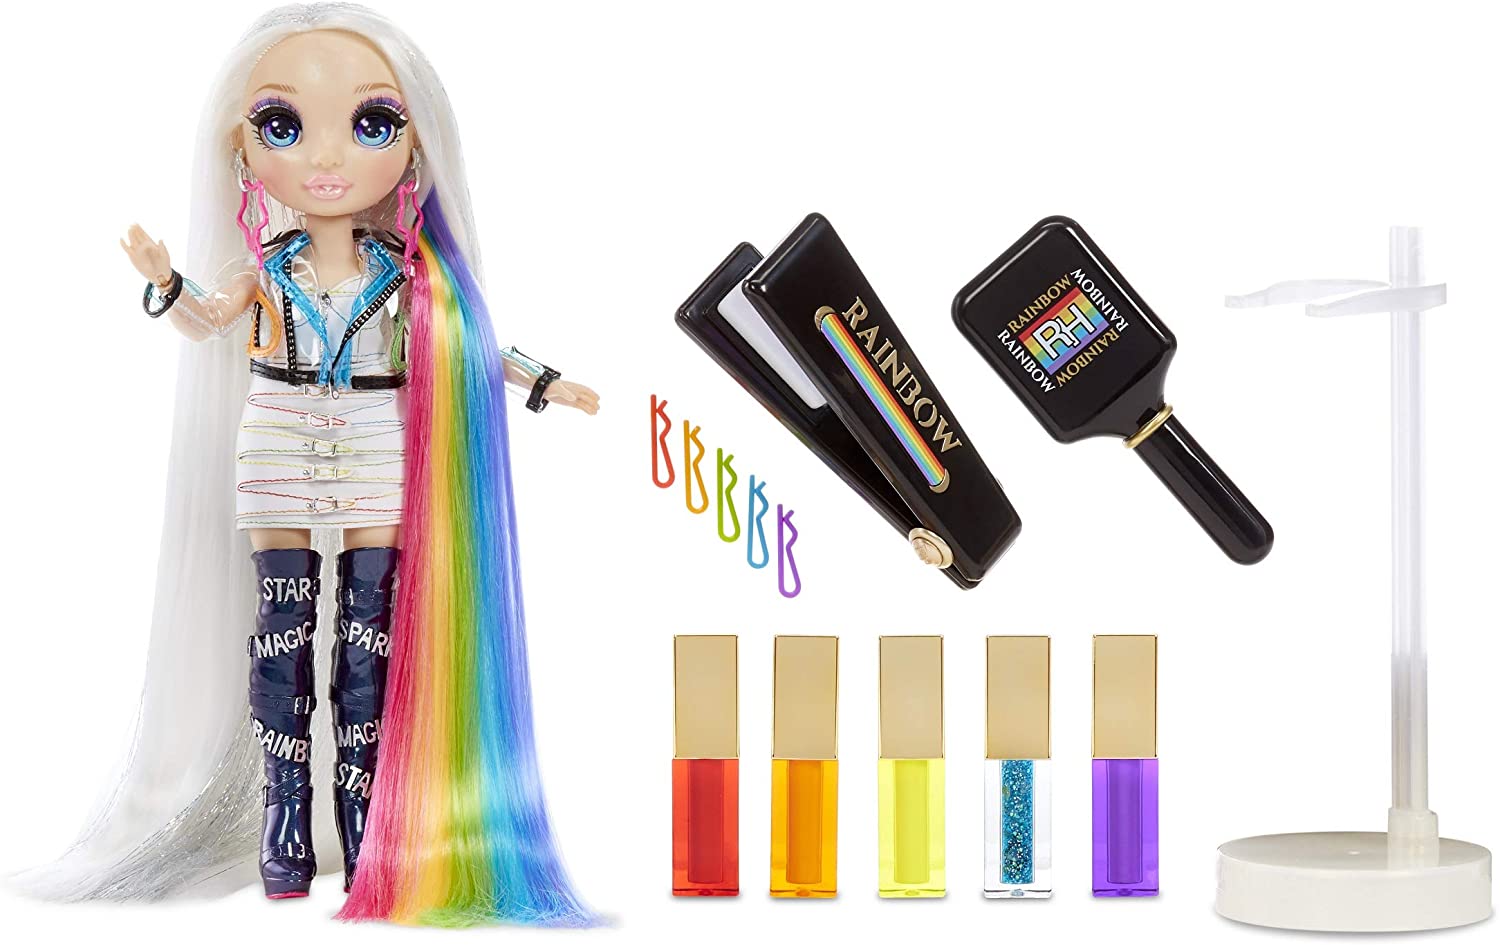 Official Rainbow High Doll 444670: Buy Online on Offer